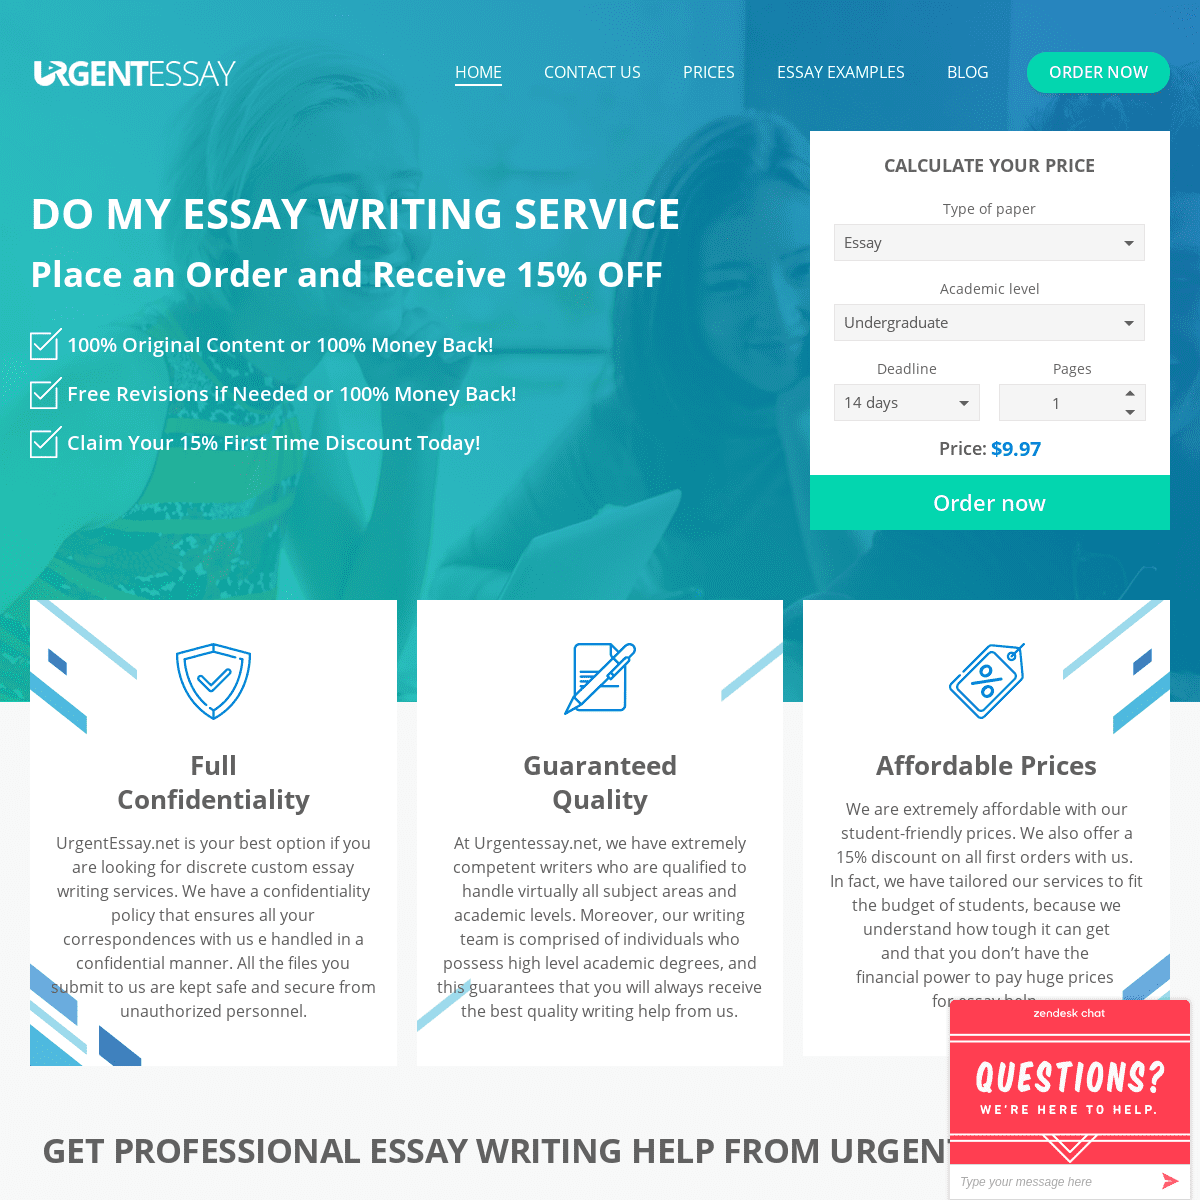 Urgent Essay Net- Your Best Essay Writing Service With Reliable Writers